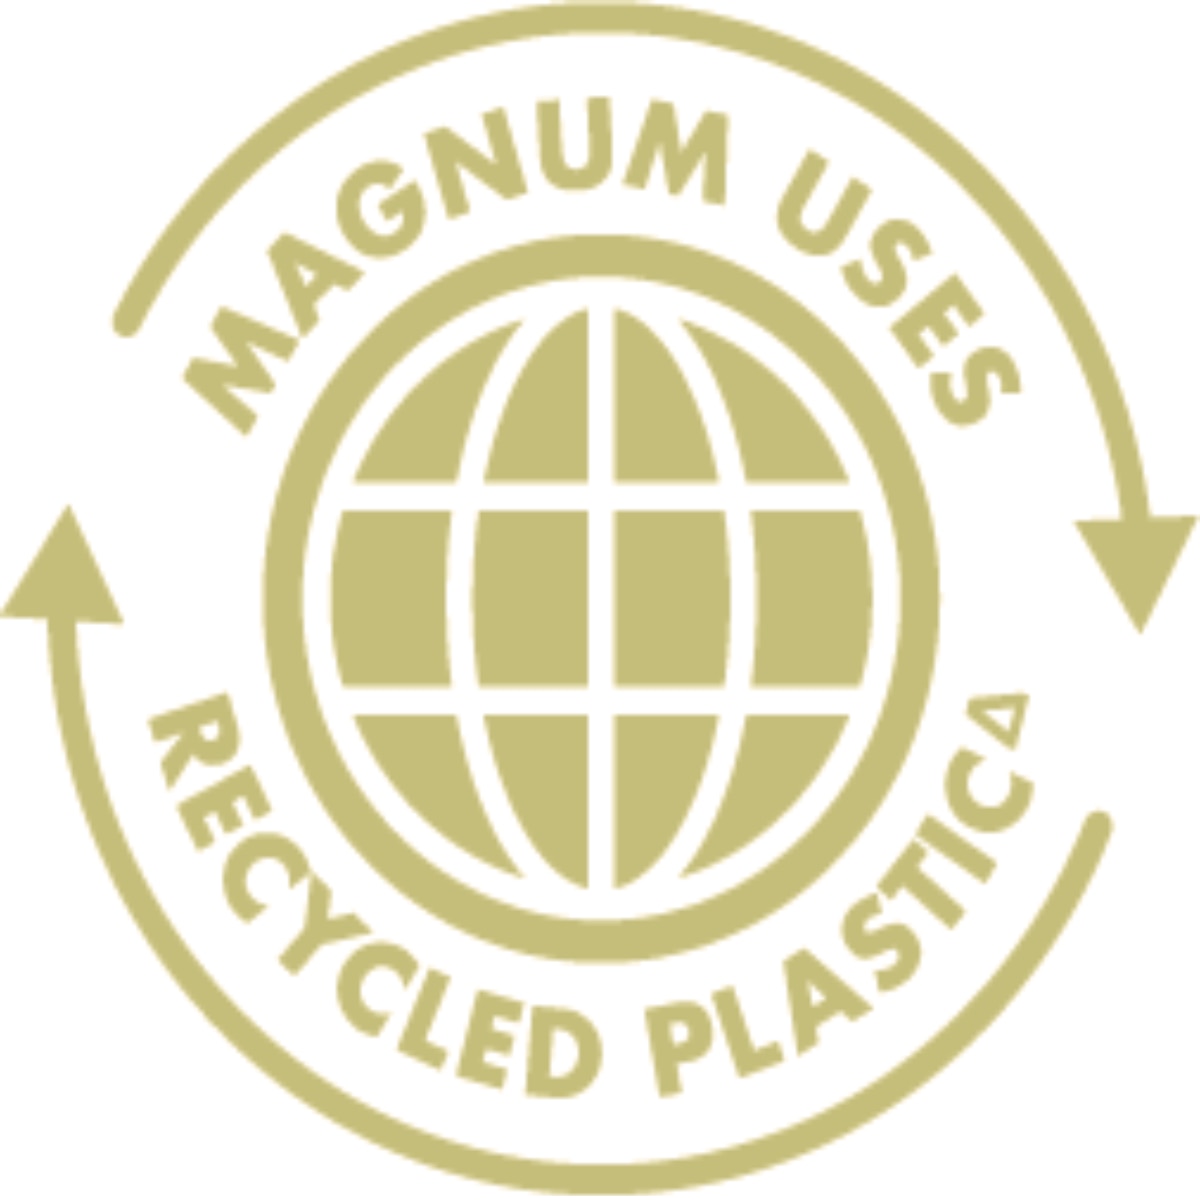 Magnum uses recycled plastic